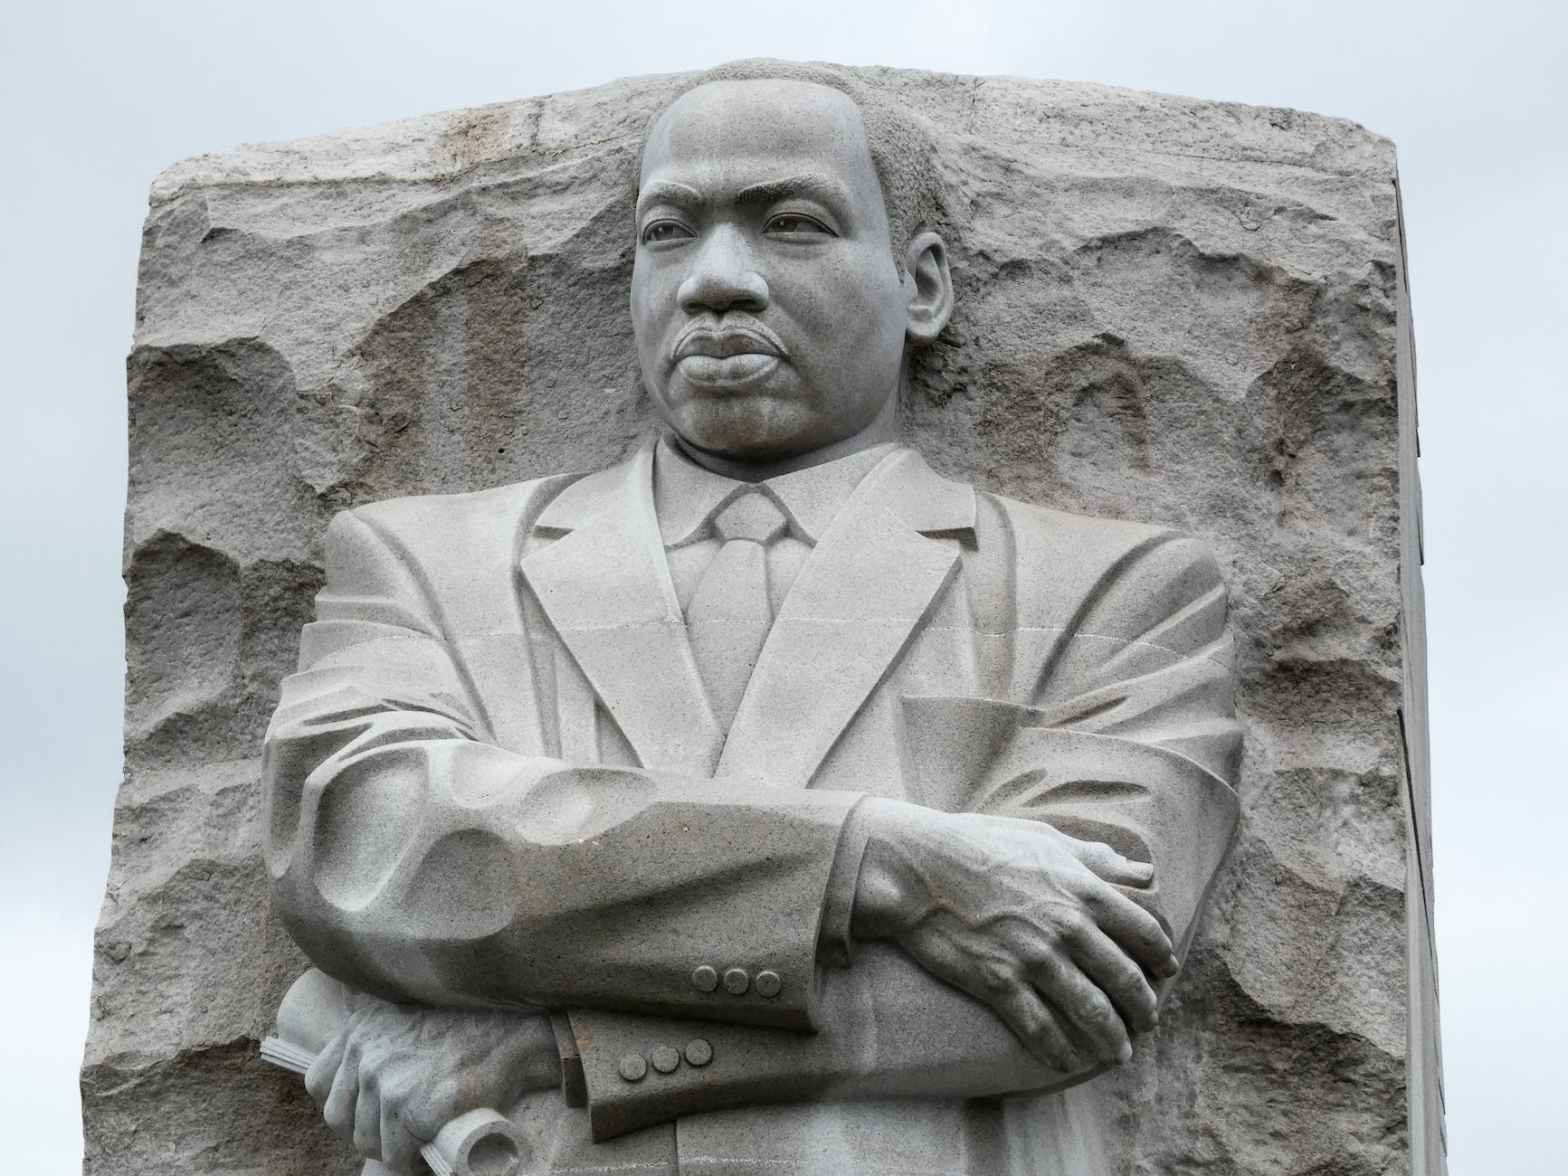 sculpture of martin luther king jr memorial in gray concrete wall